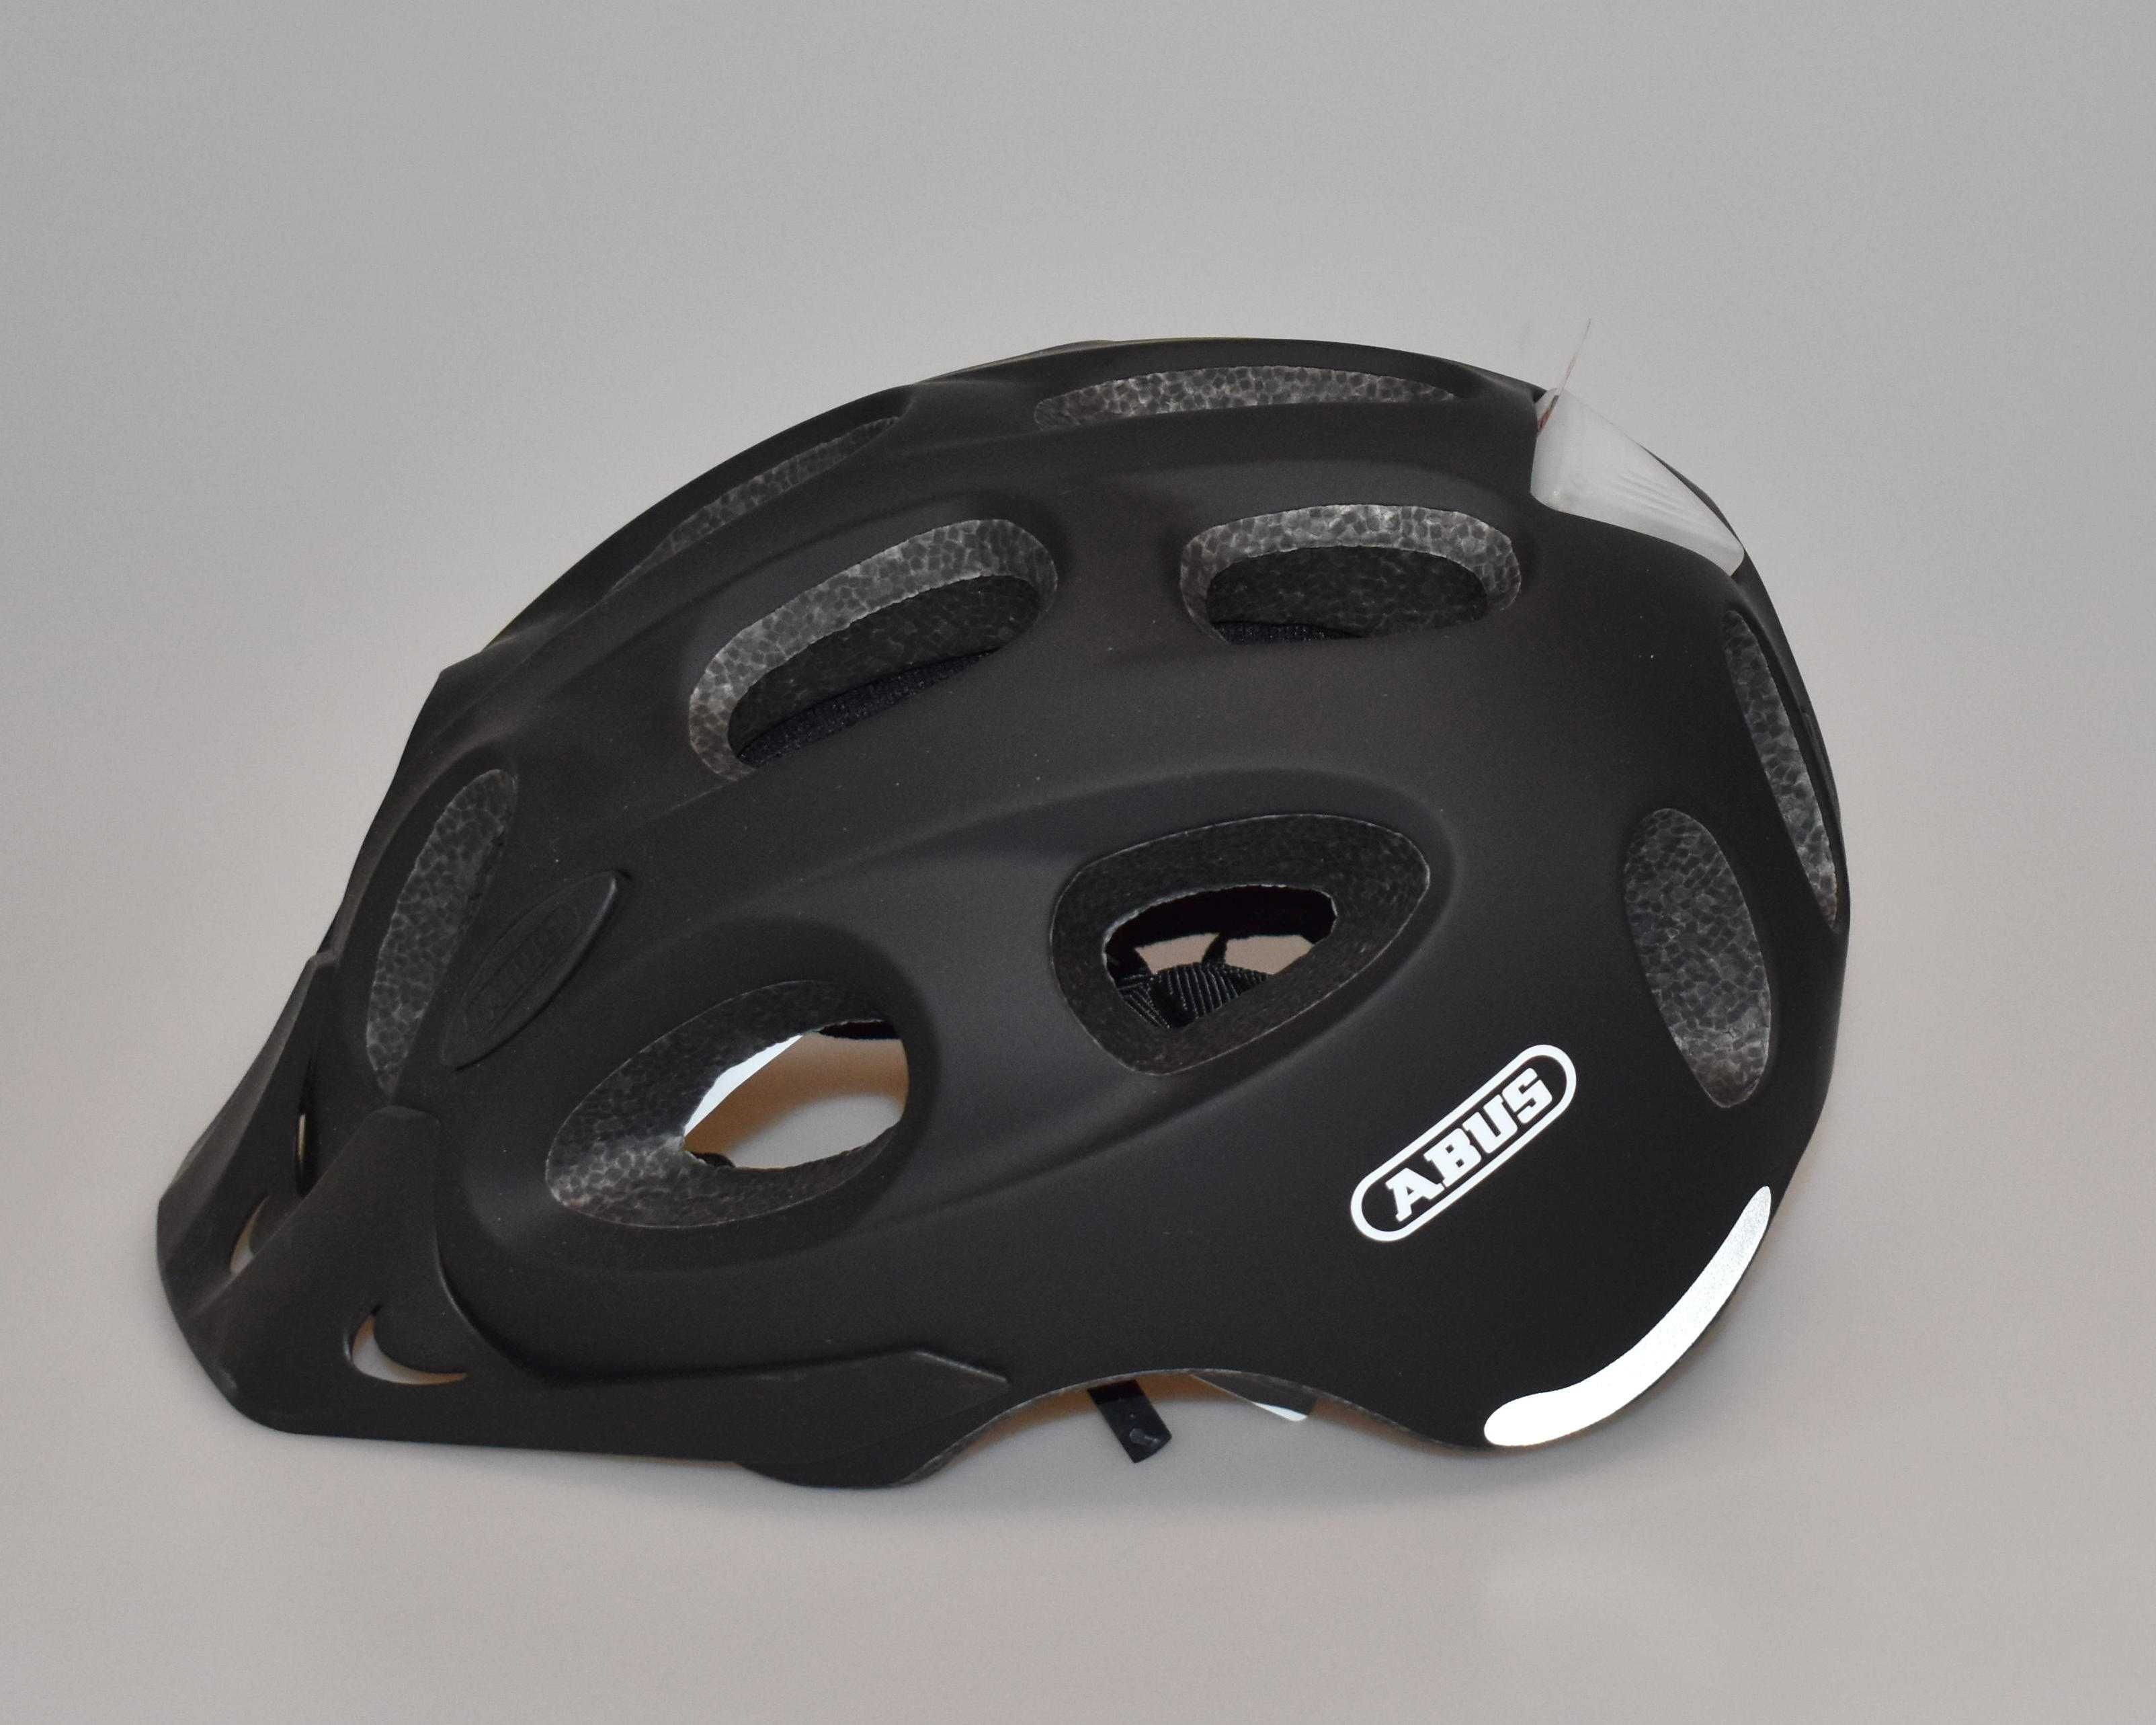 Kask rowerowy Abus Youn-I Ace r. M 52-57